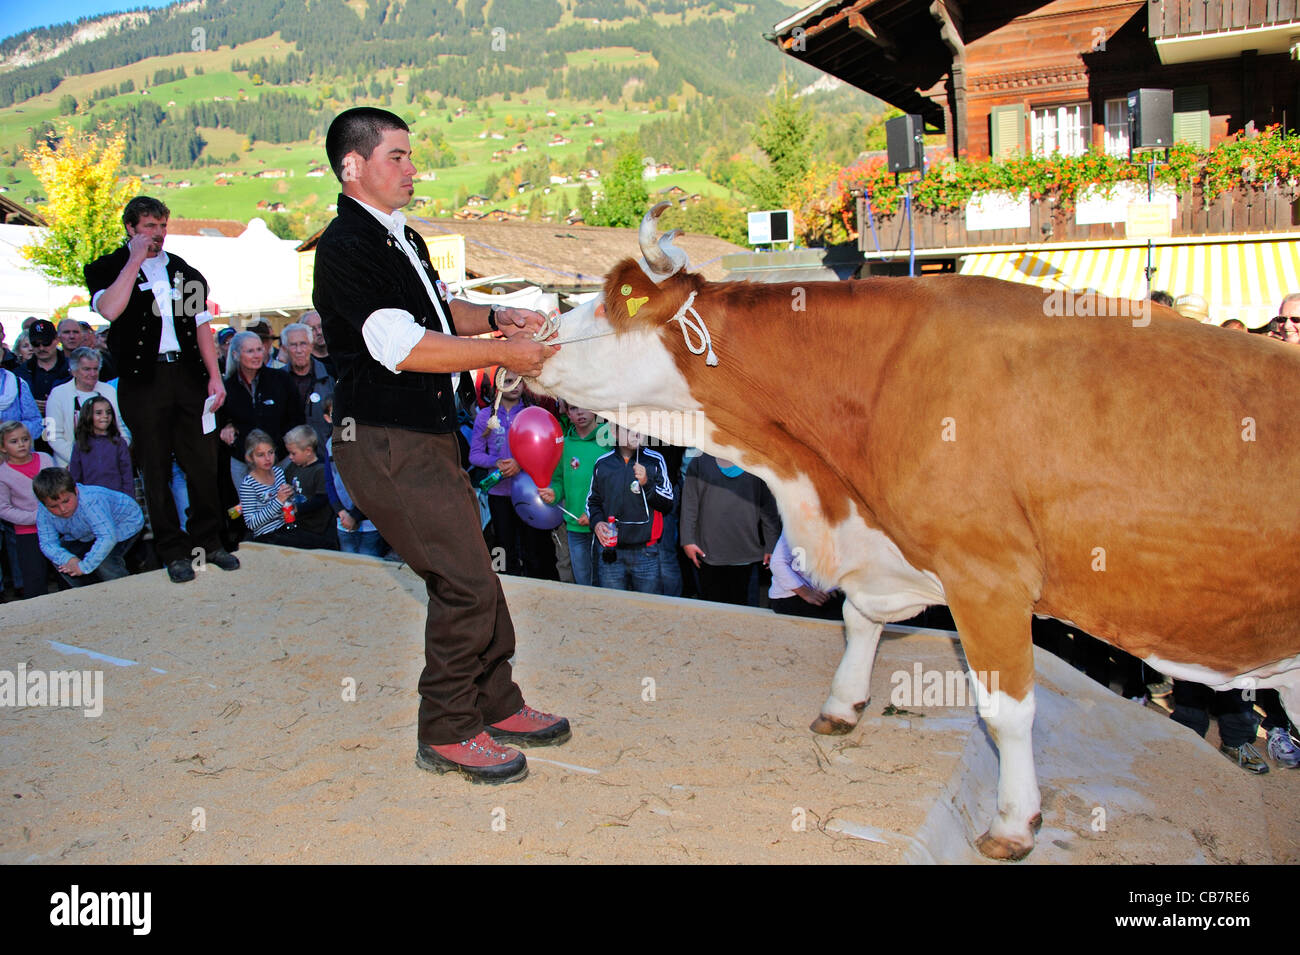 Swiss farmer pulling his cow up a ramp (it was a prizewinner and had to go on stage) Stock Photo